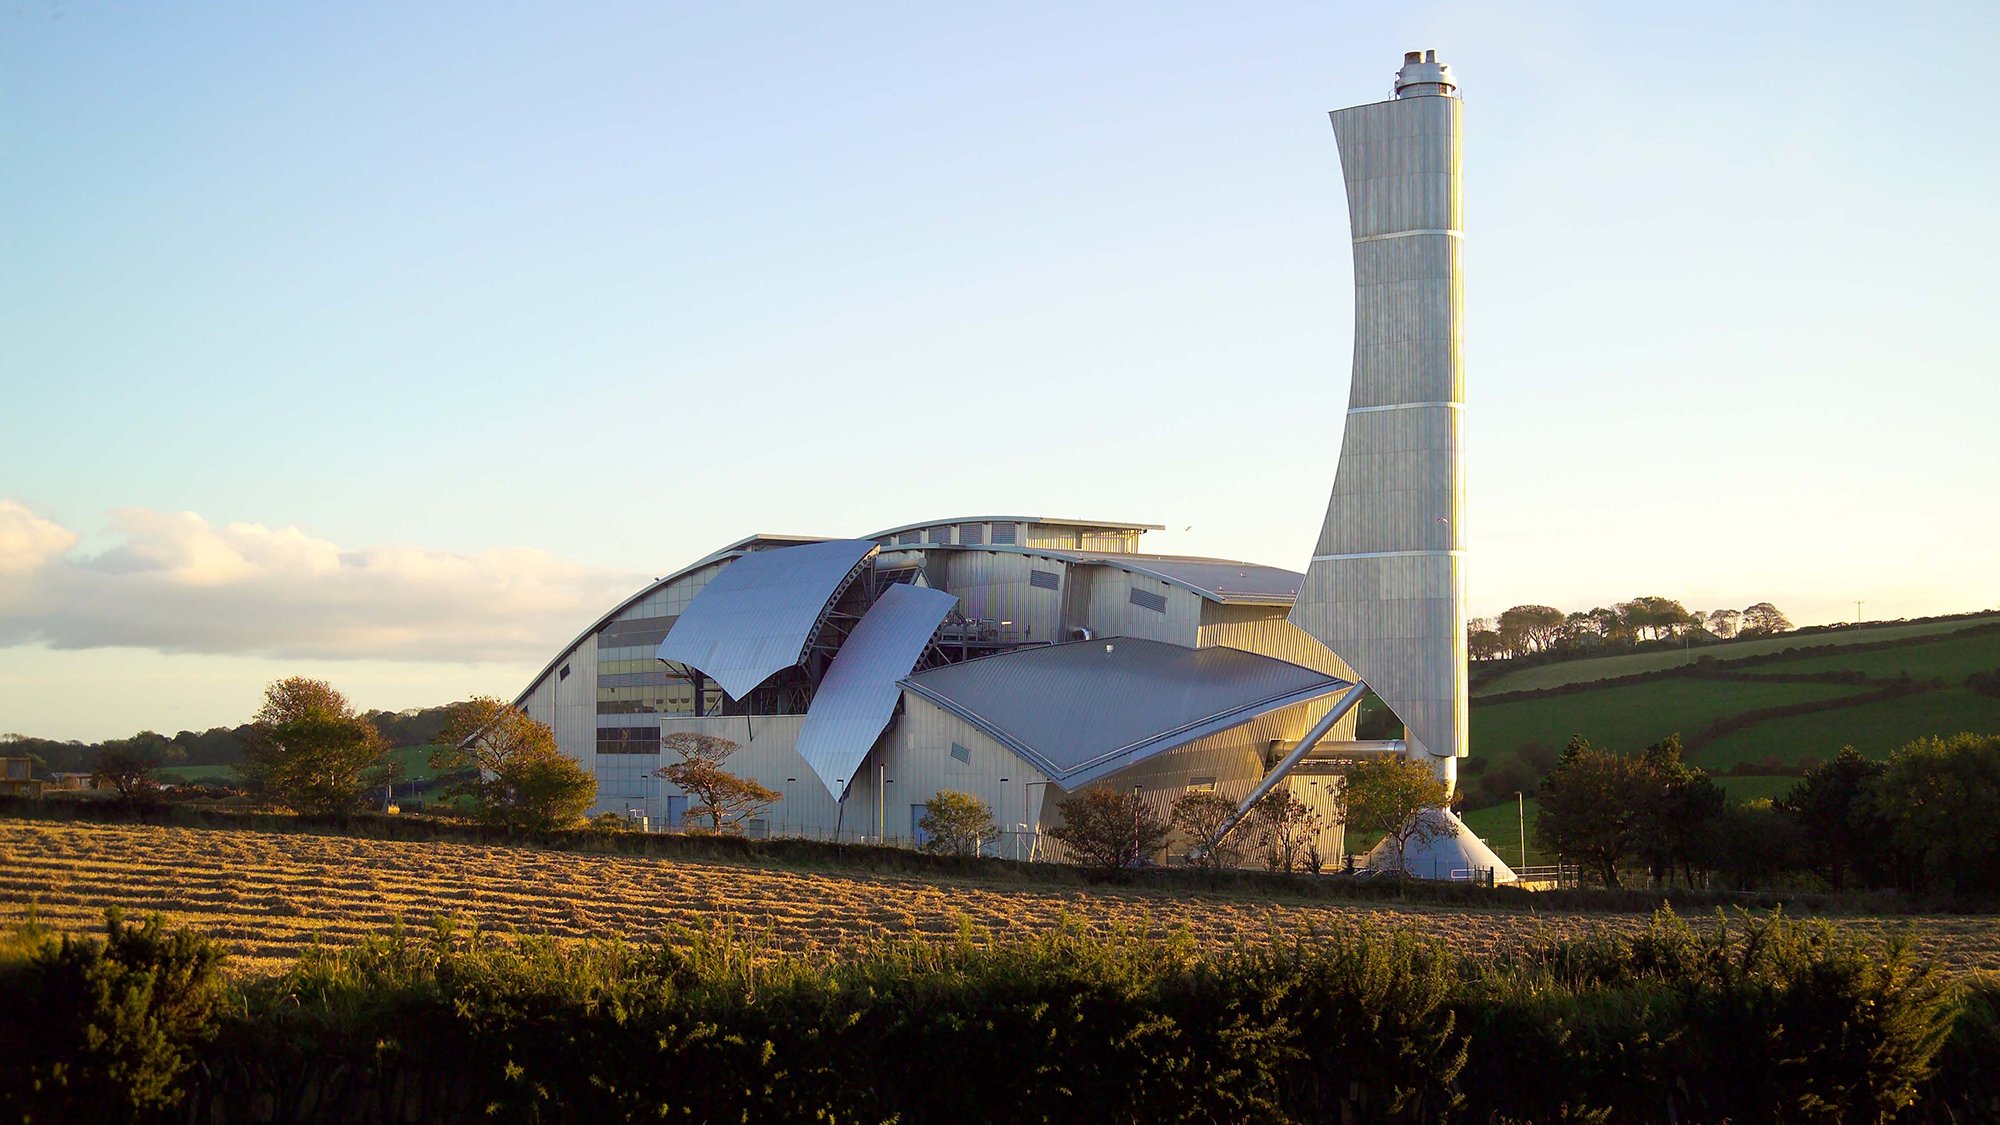 Isle of Man energy from waste facility